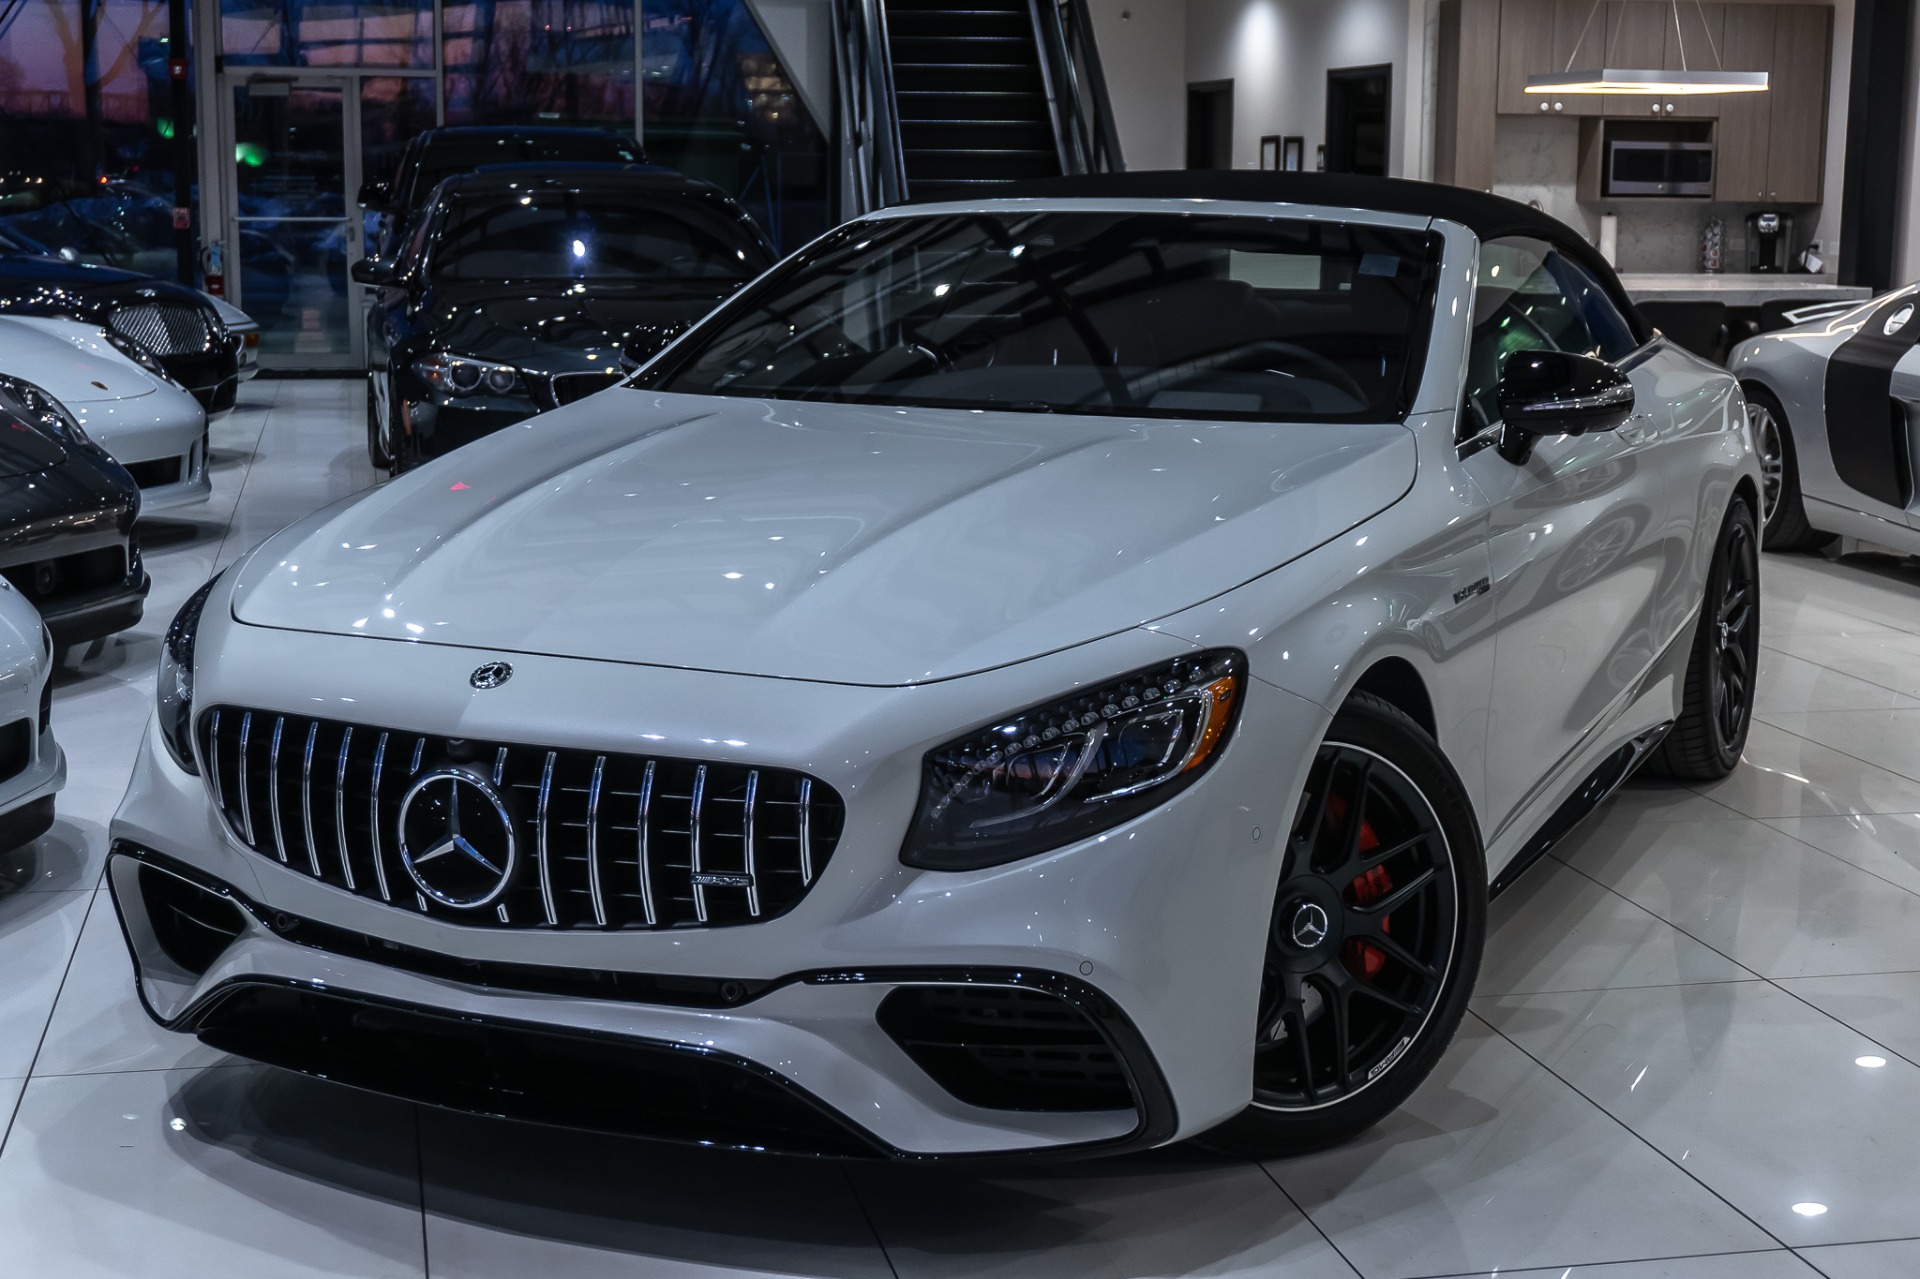 Used-2019-Mercedes-Benz-S63-AMG-Cabriolet-4Matic-Exclusive-Pkg-AMG-Night-Vision-Pkg-MSRP-197k-Only-183-Miles